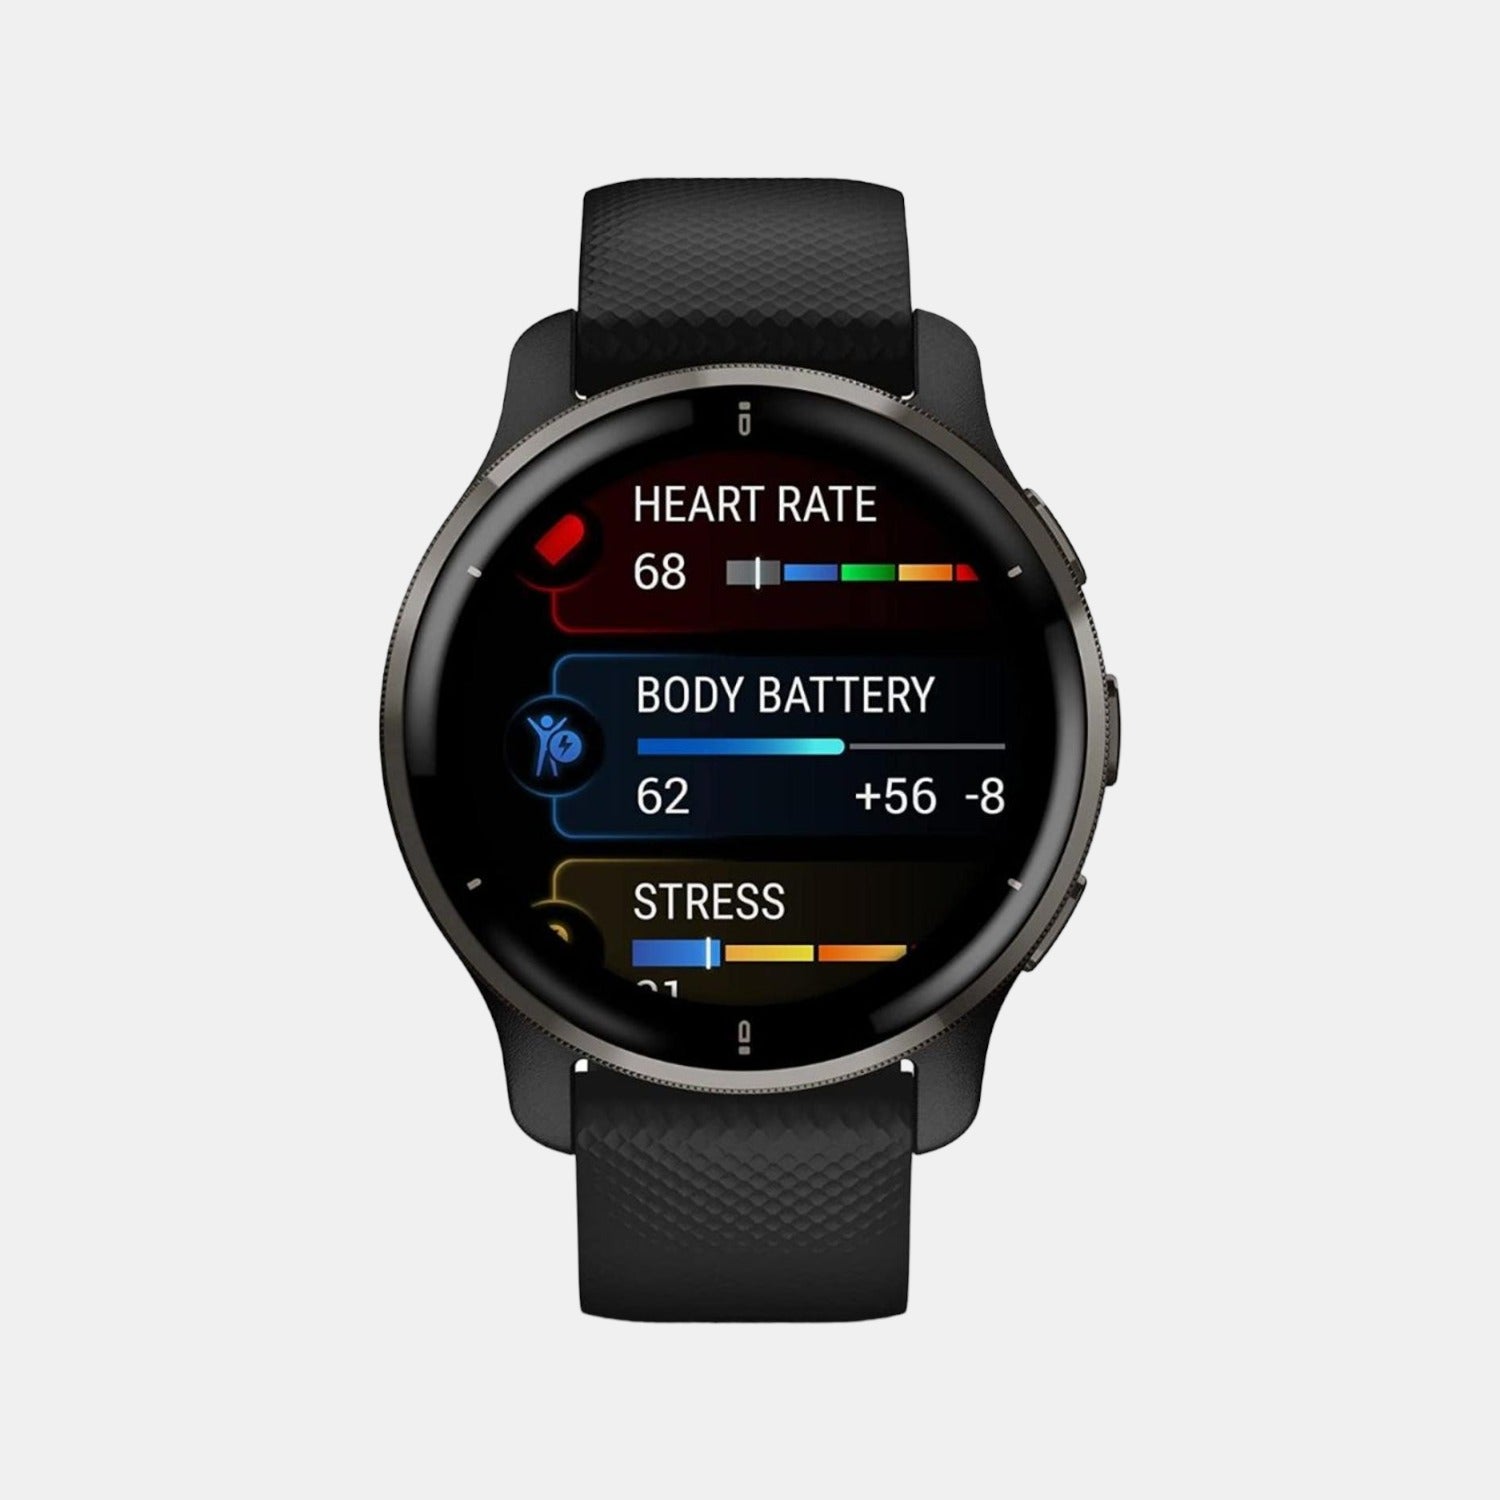 CMF by Nothing Watch Pro, Gray 1.96 AMOLED display, BT calling GPS  Smartwatch | eBay